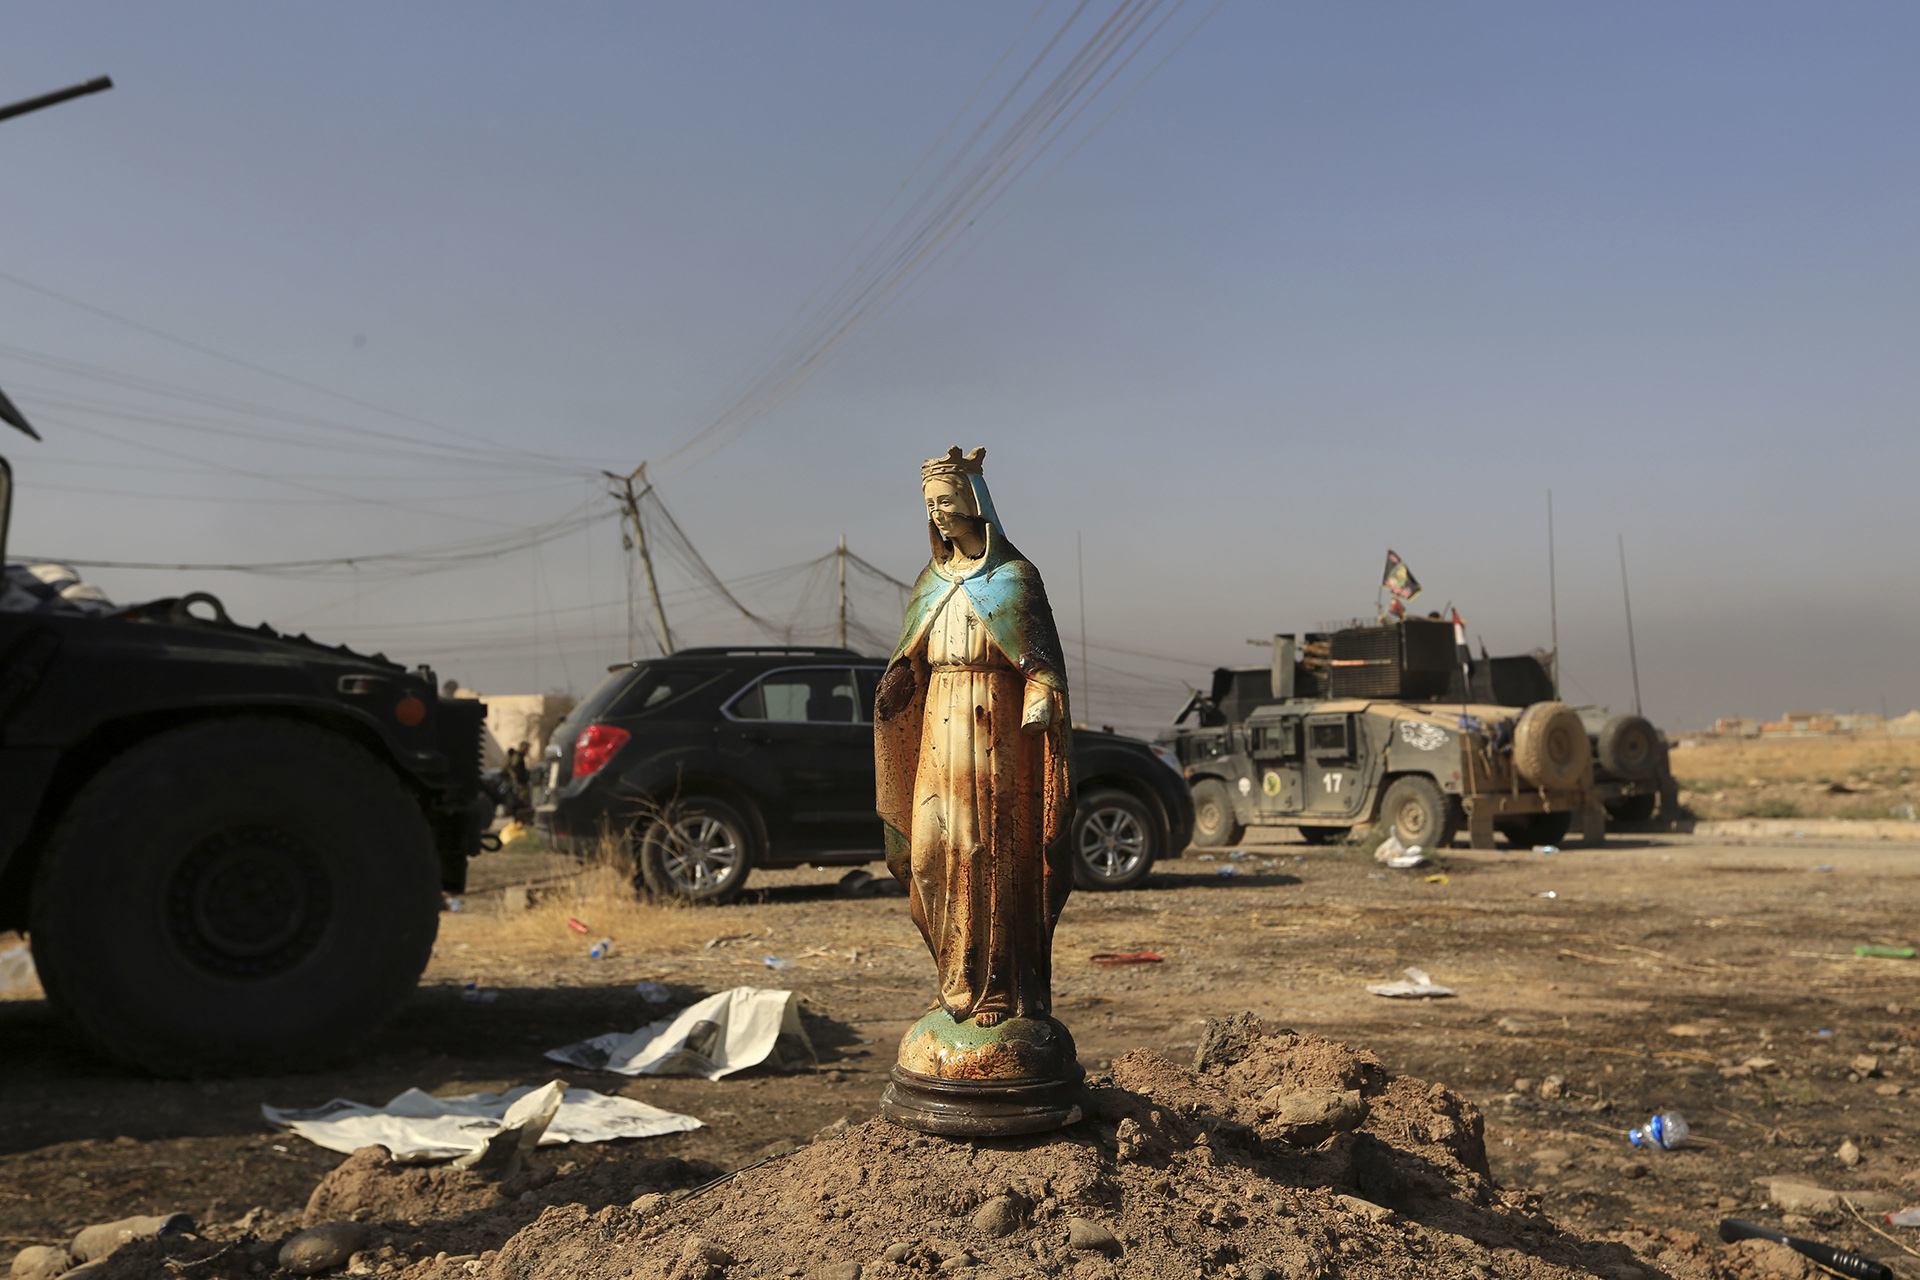 A statue of Virgin Mary is placed in a street in Bartella, Iraq, Sunday, Oct. 23, 2016. Iraqi forces captured Bartella, around 15 kilometers (9 miles) east of Mosul. (AP Photo/Khalid Mohammed)